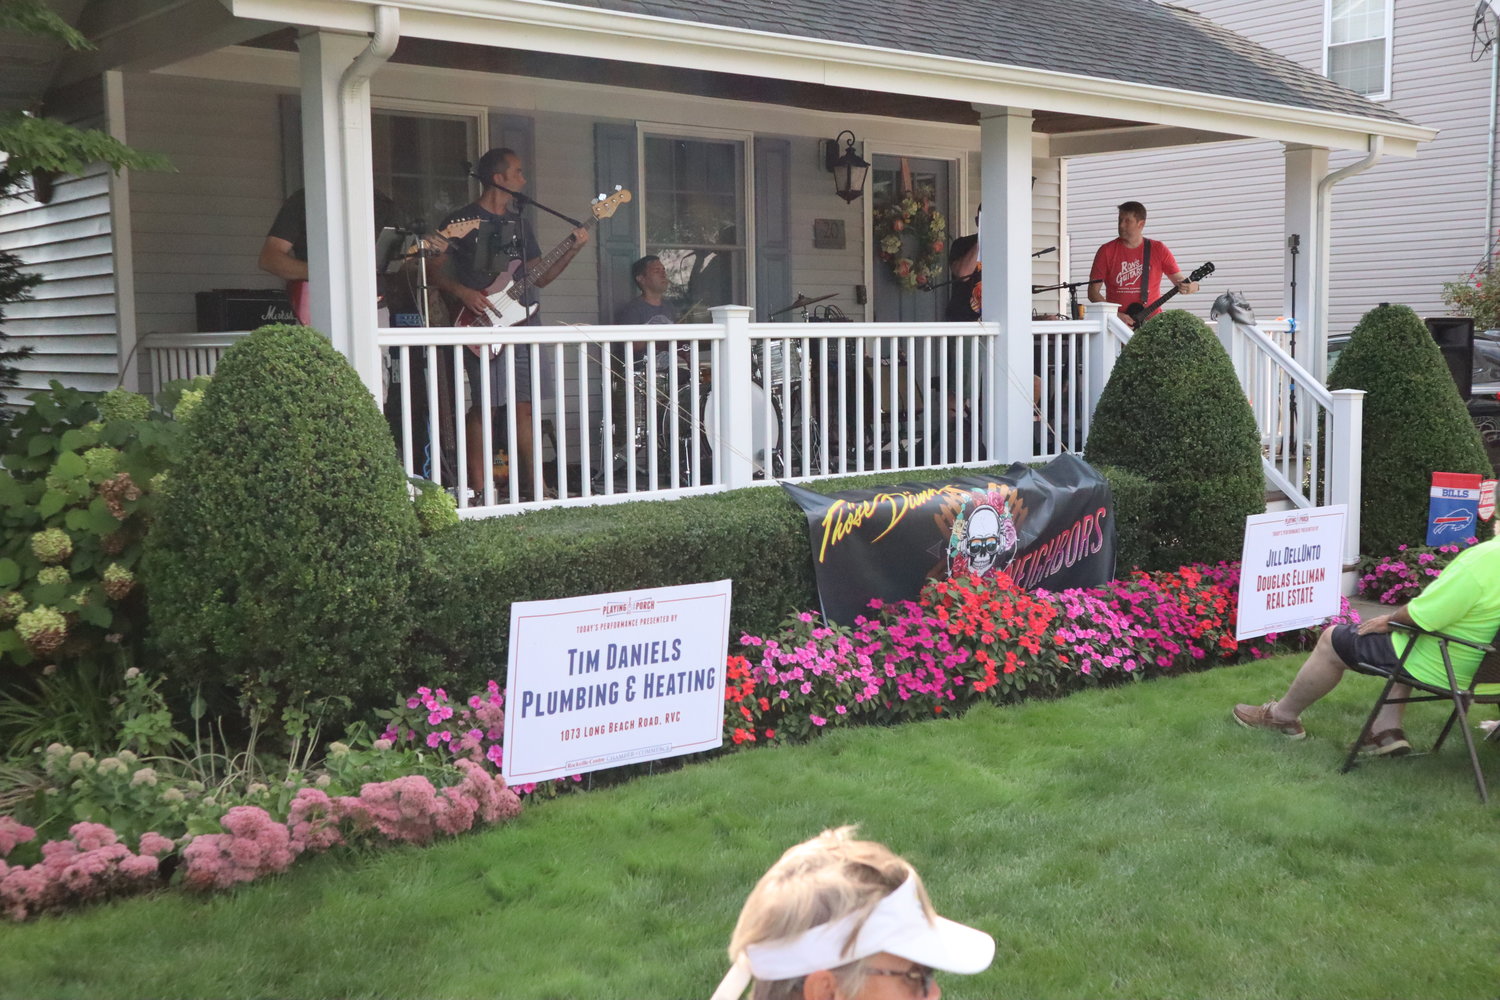 Those Damn Neighbors perform on the front porch of this home on Linden Street.